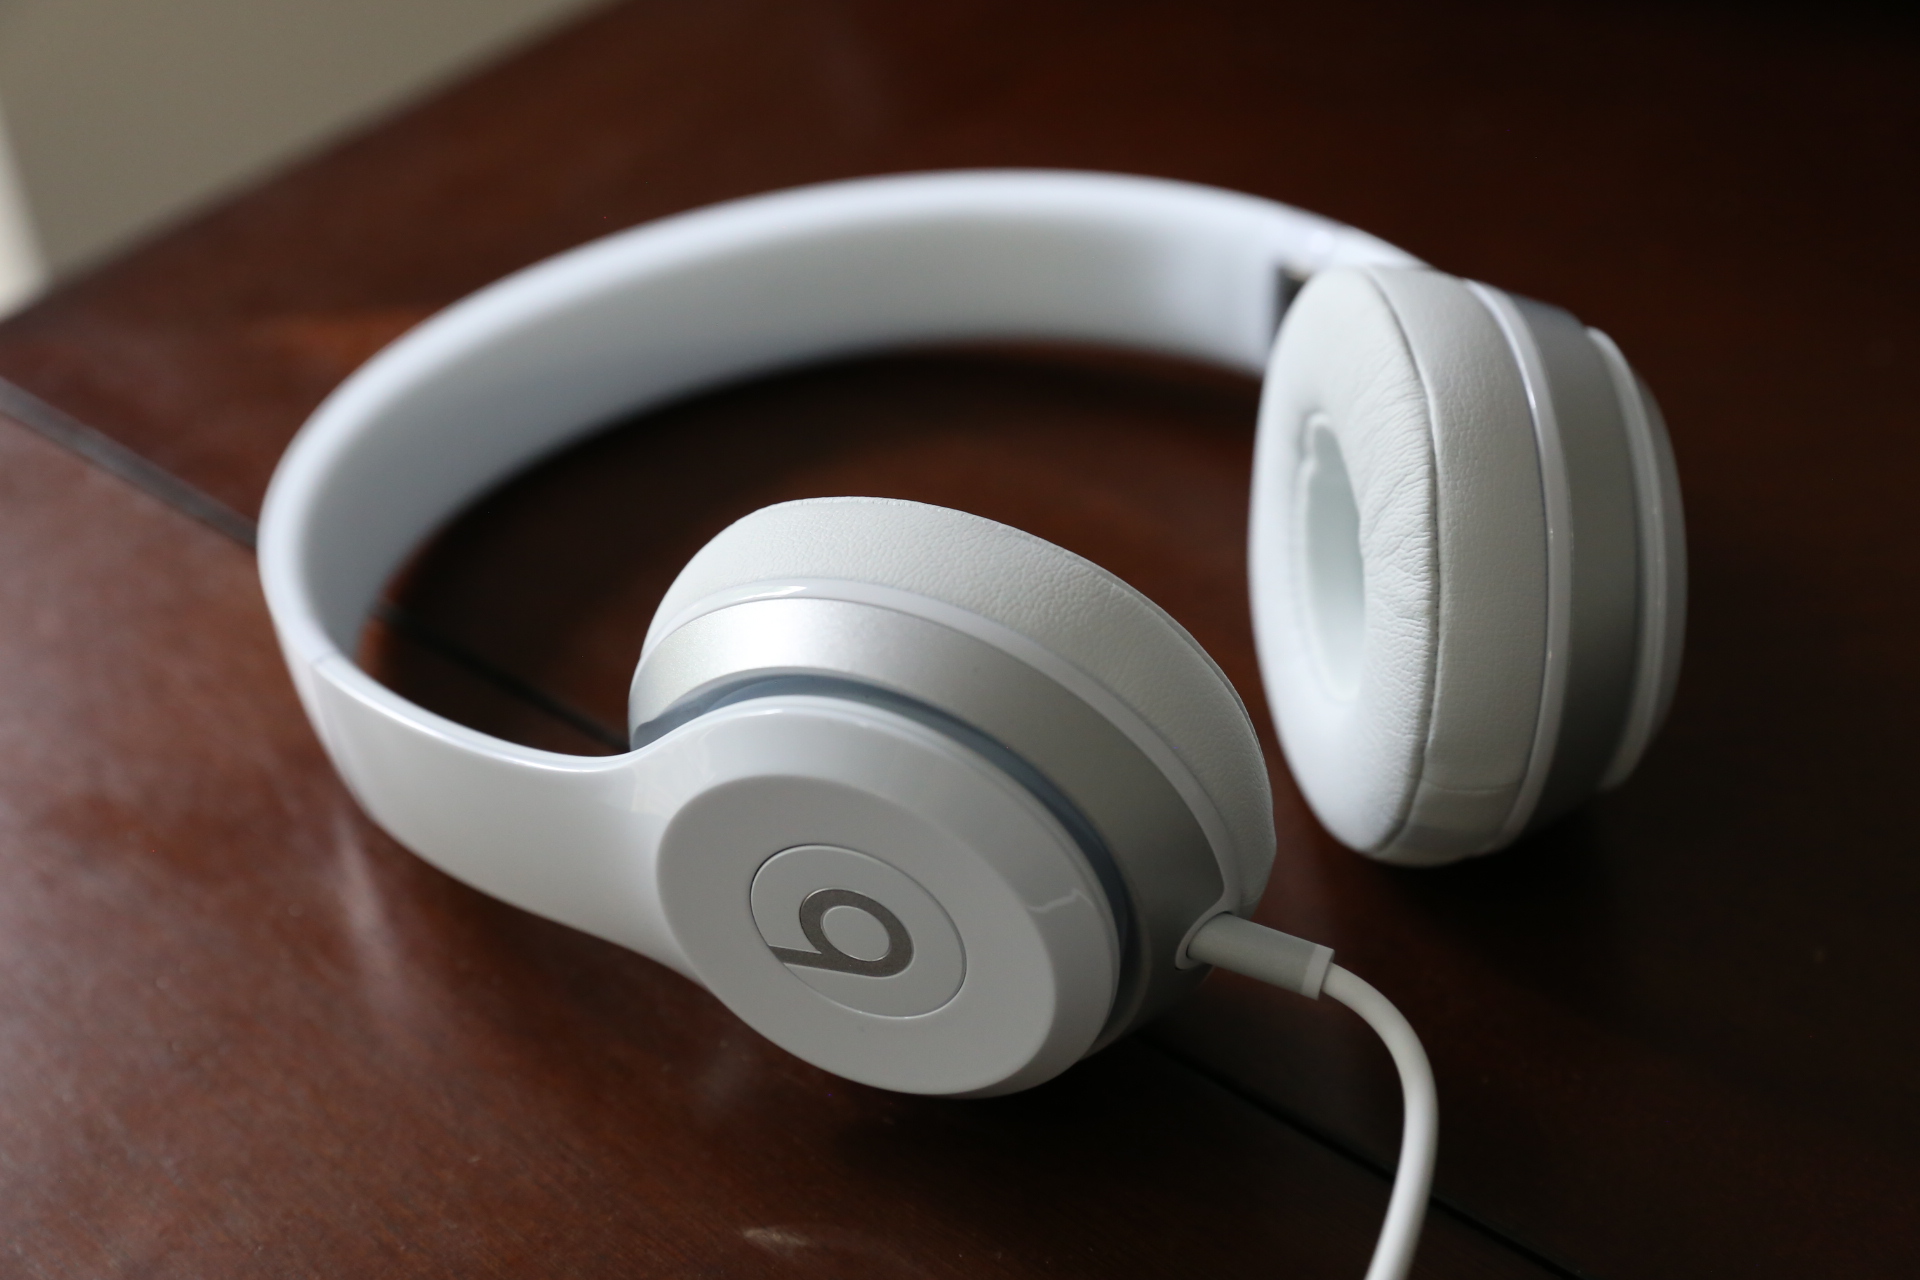 Beats Solo 2 Review: Great Looks, Now 